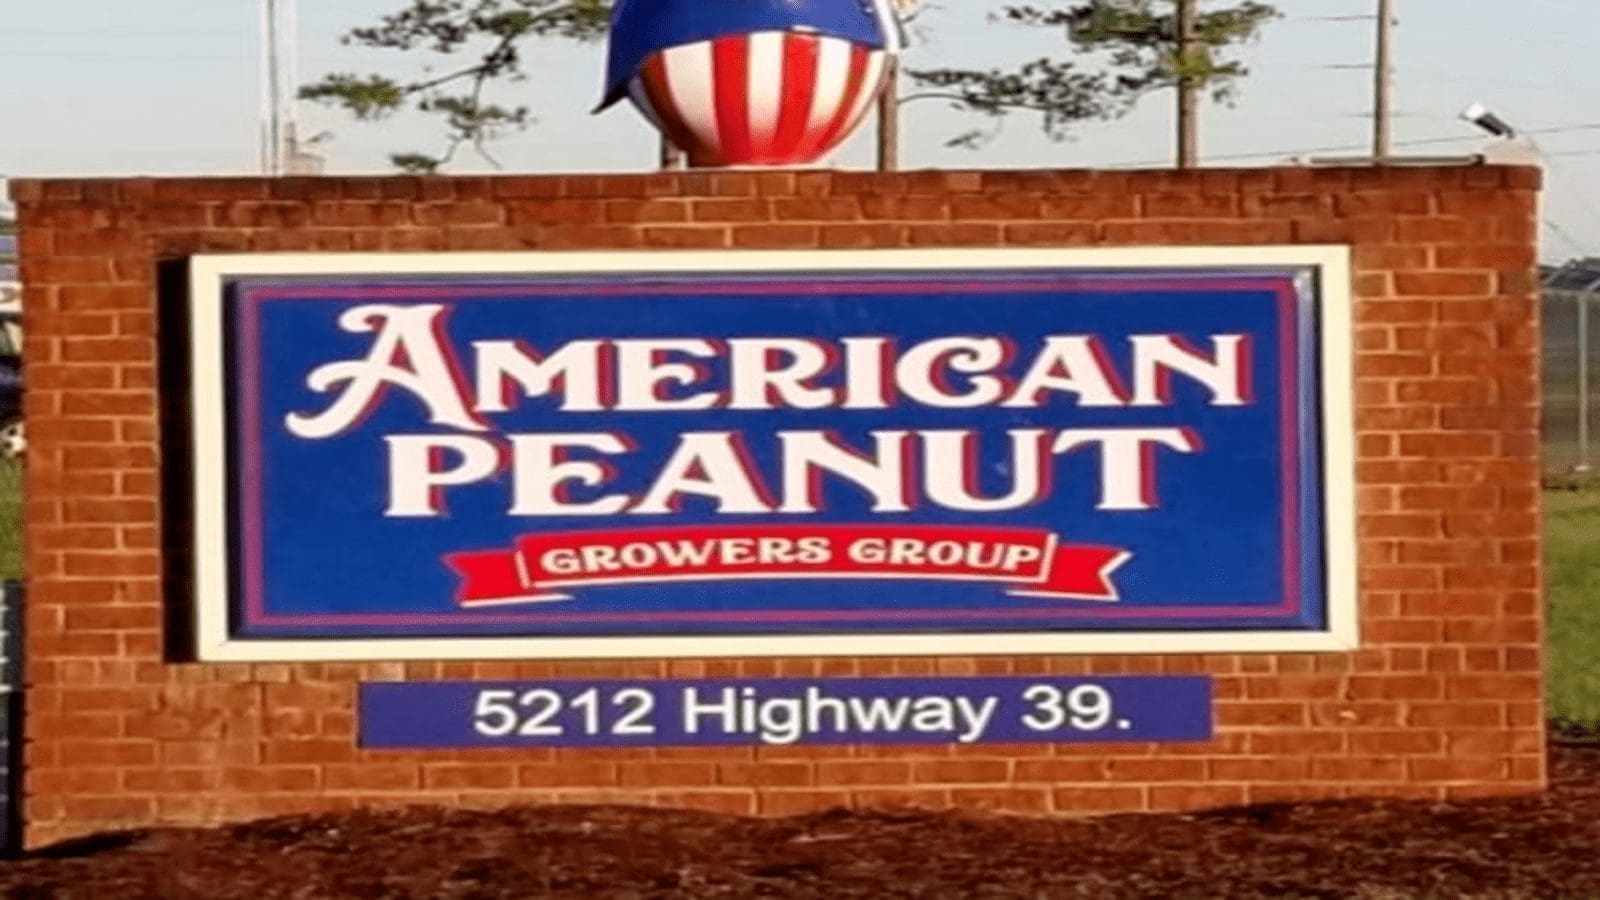 American Peanut Growers Group to invest US$85m in new peanut shelling plant